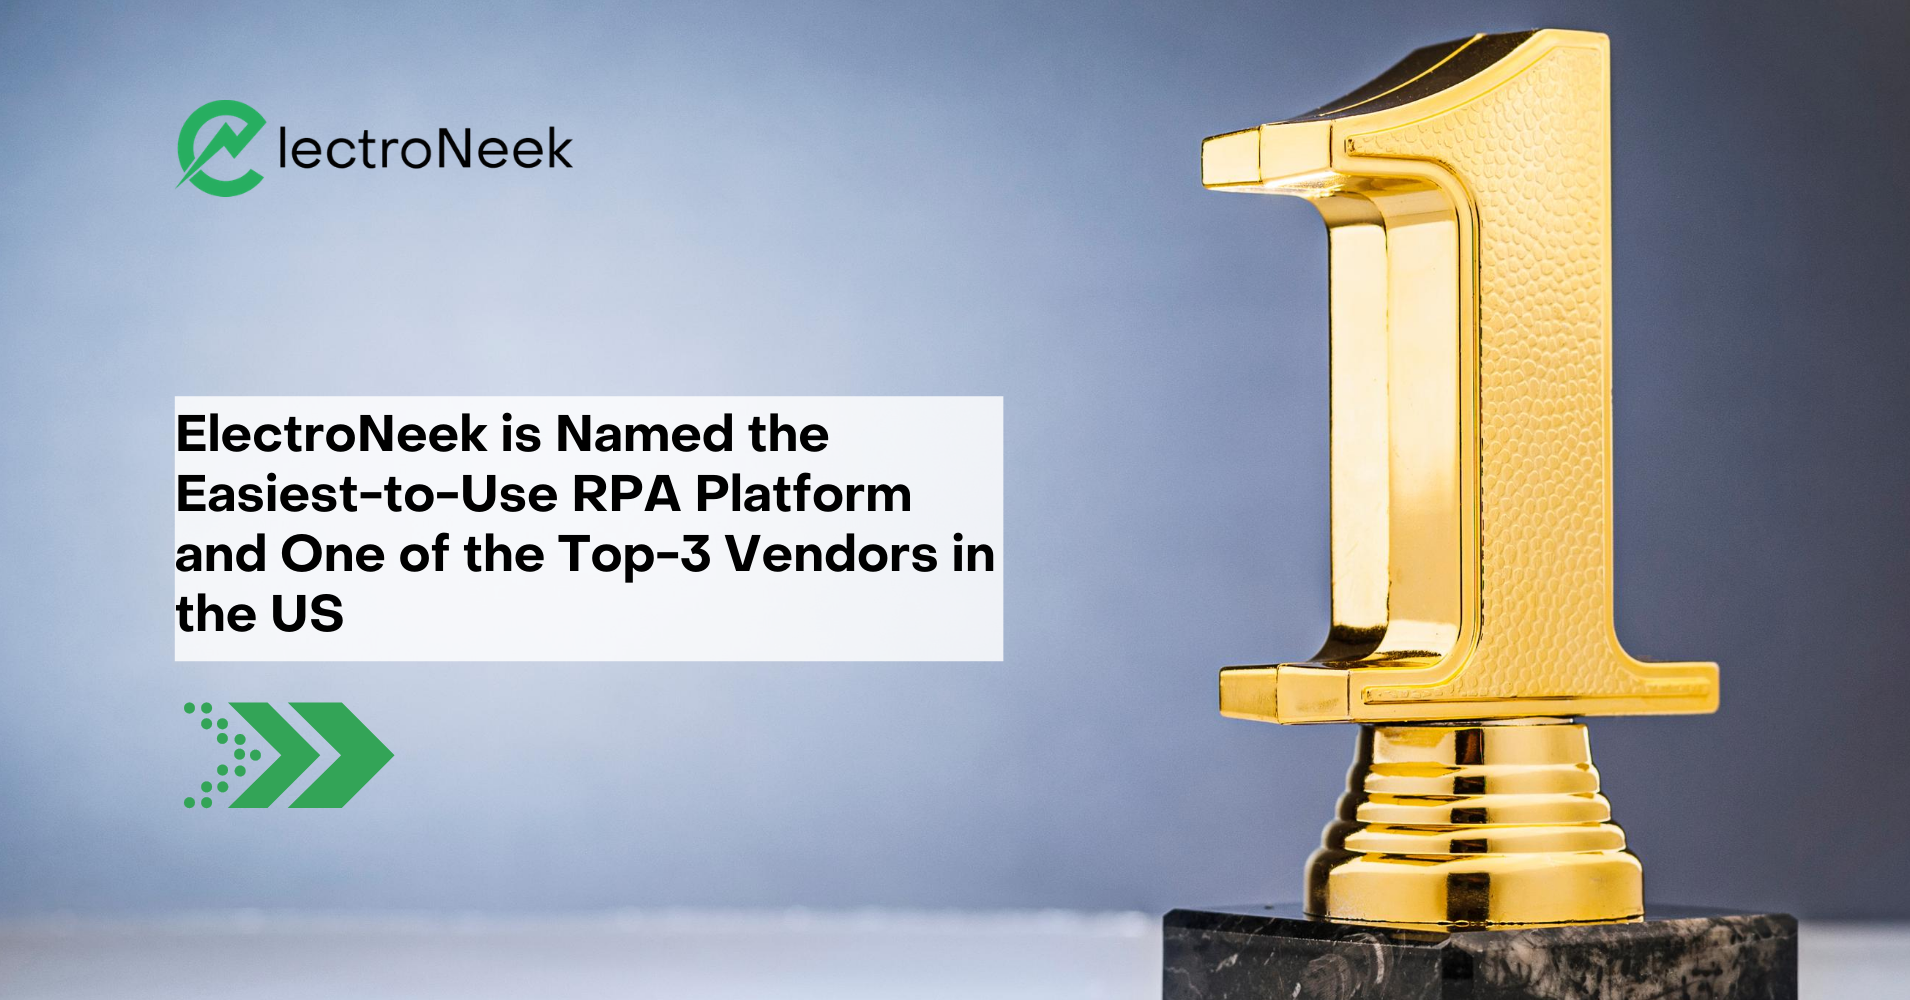 ElectroNeek is Named the Easiest-to-Use RPA platform and One of the Top-3 Vendors in the US